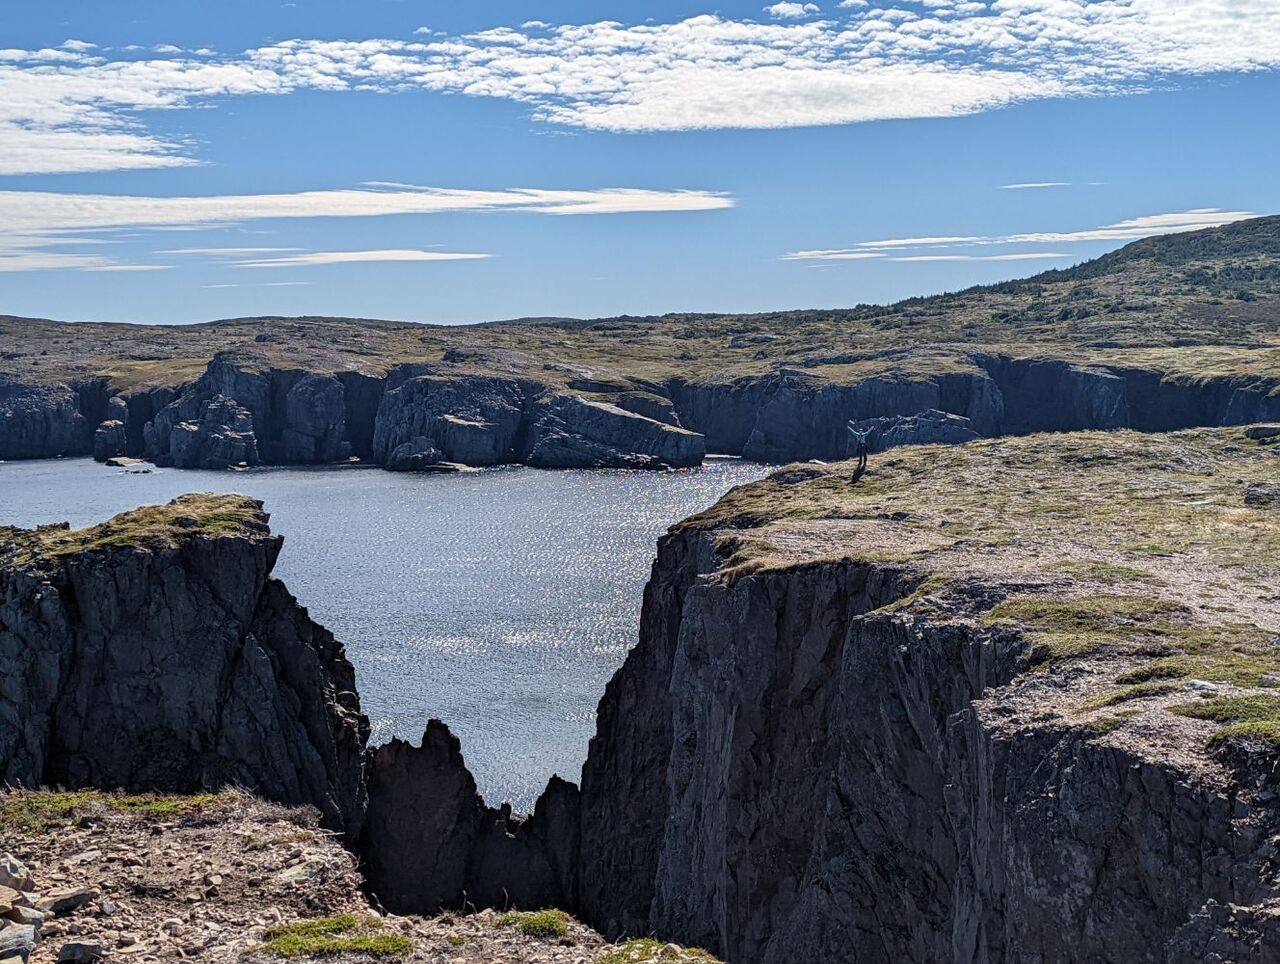 A picture of the cliffs of Spillar's Cove.